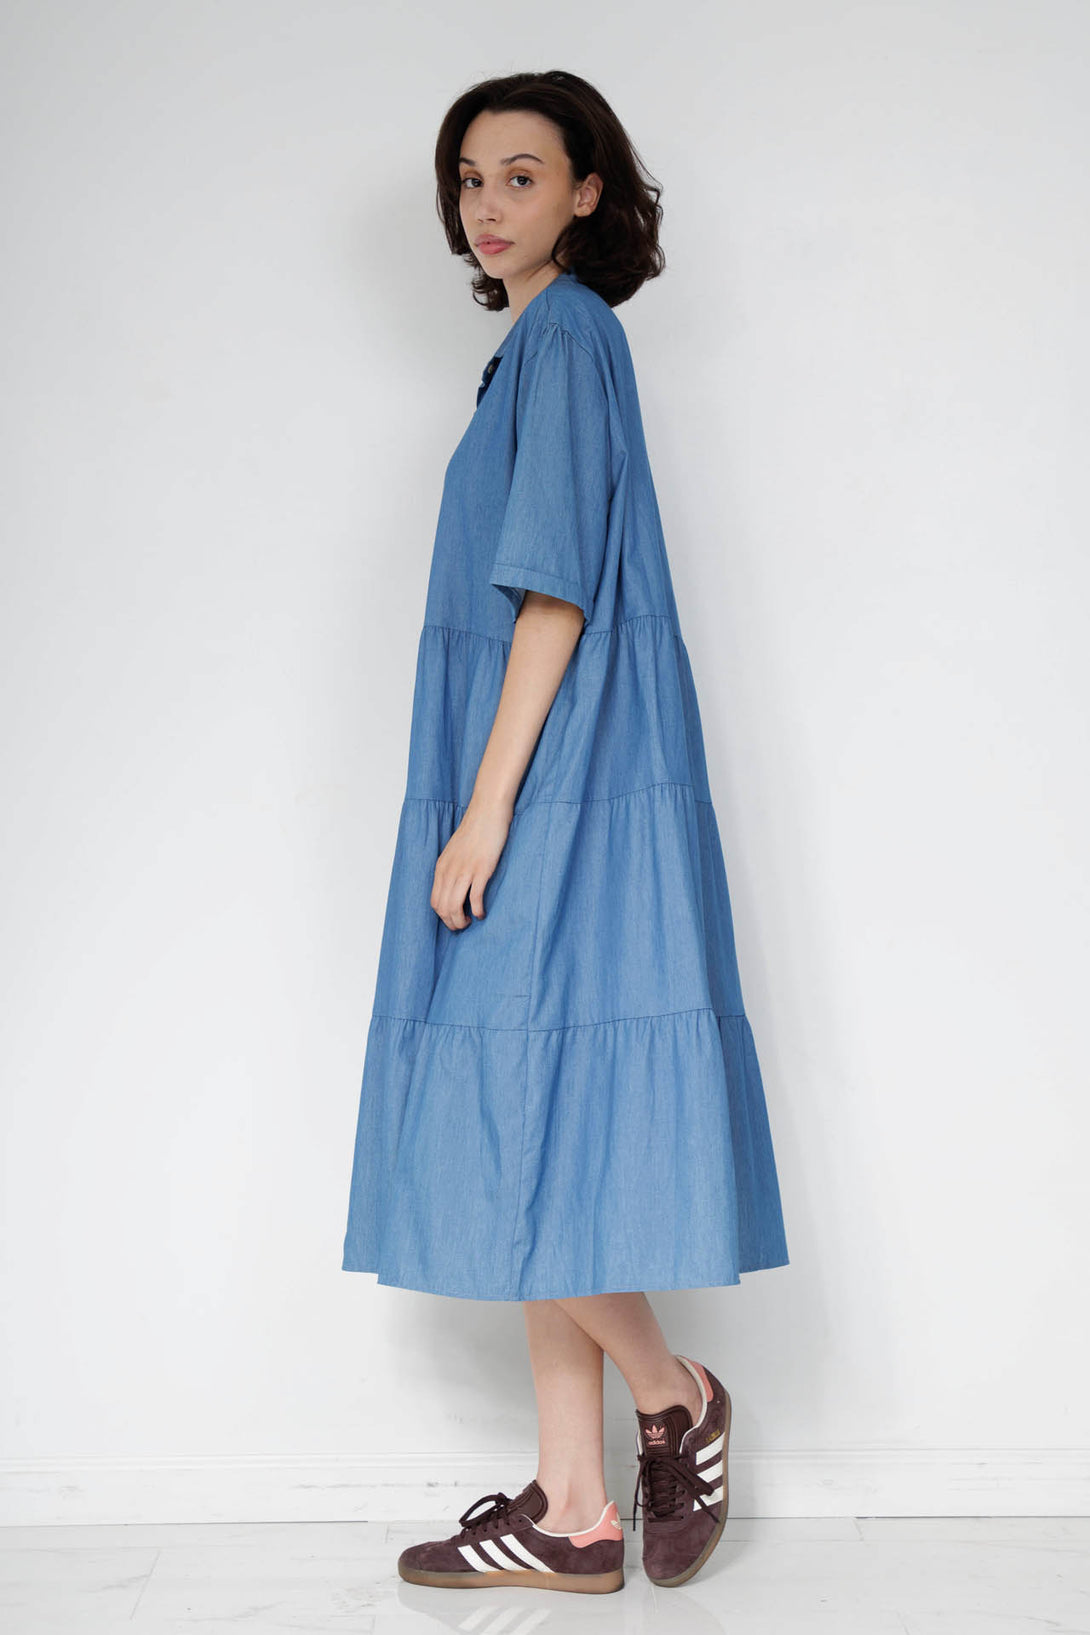 jeans shirt dress for women, HT 360 Collective, outfit denim shirt, denim midi shirt dress, 